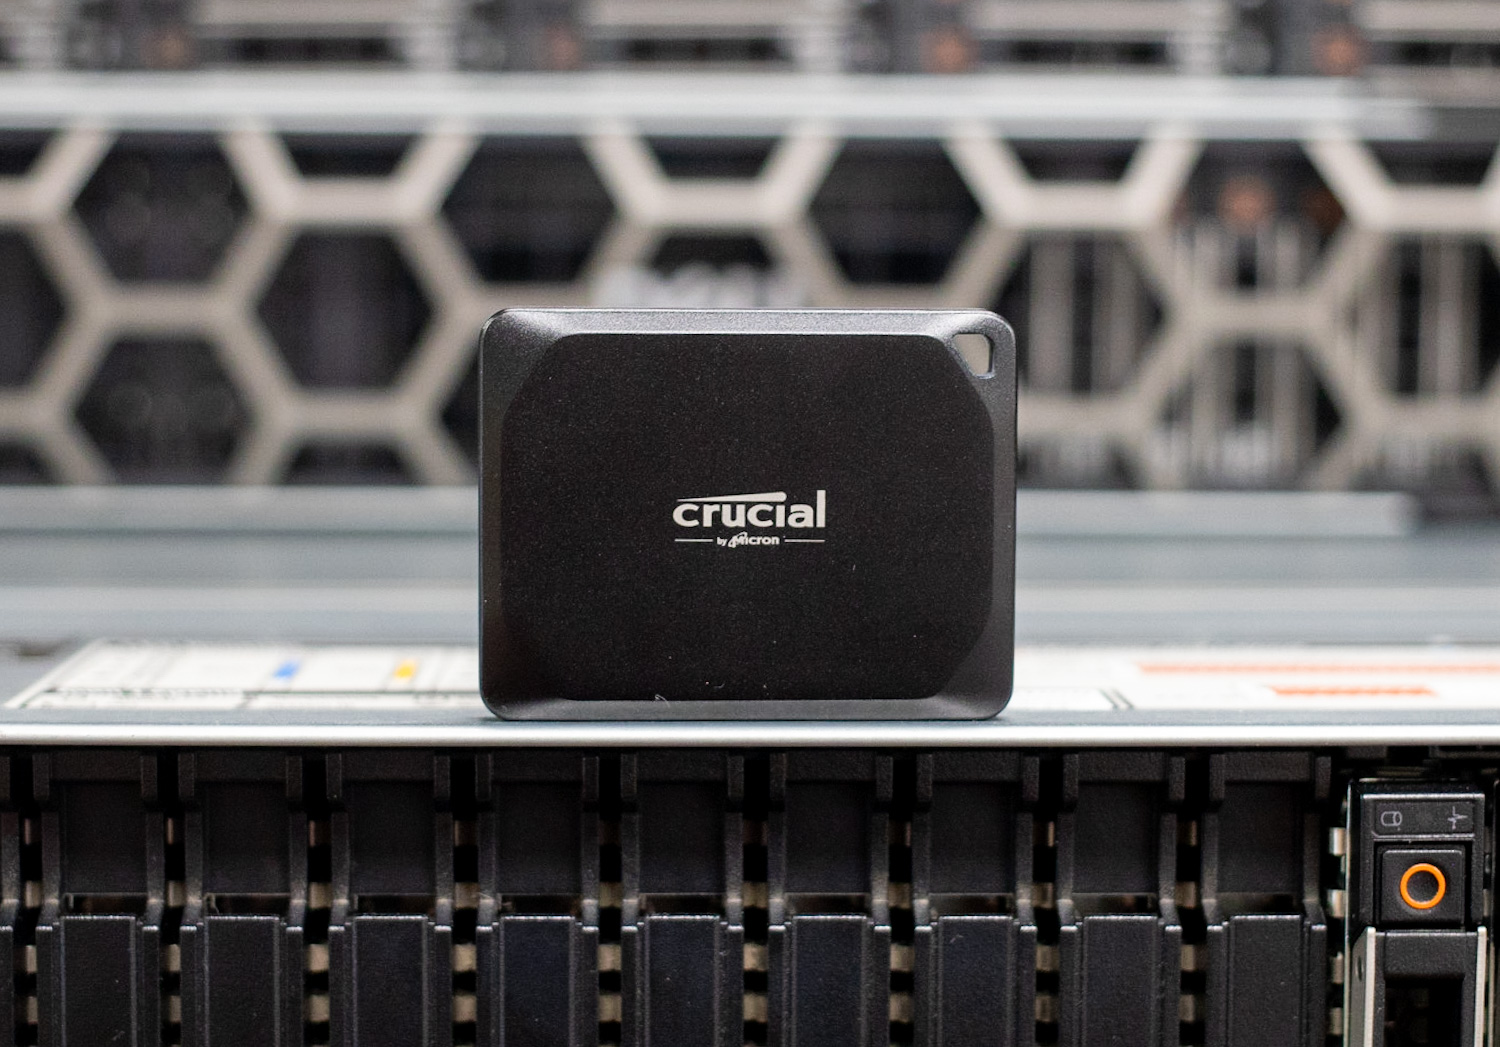 Crucial X10 Pro 2TB Portable SSD Review